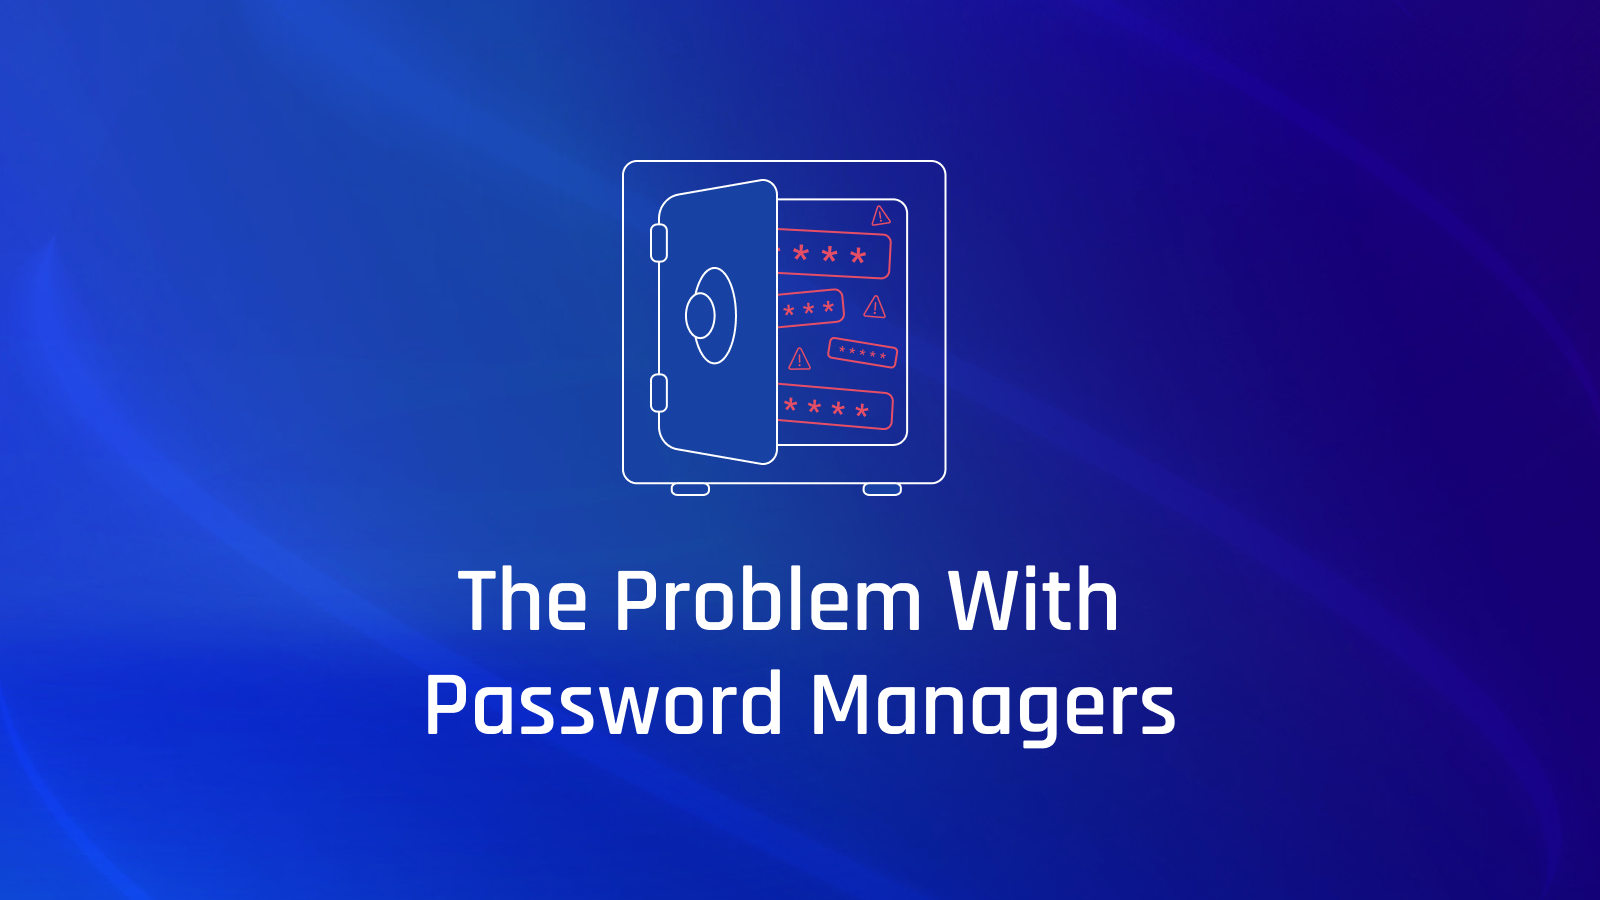 Six of the Biggest Problems with Password Managers